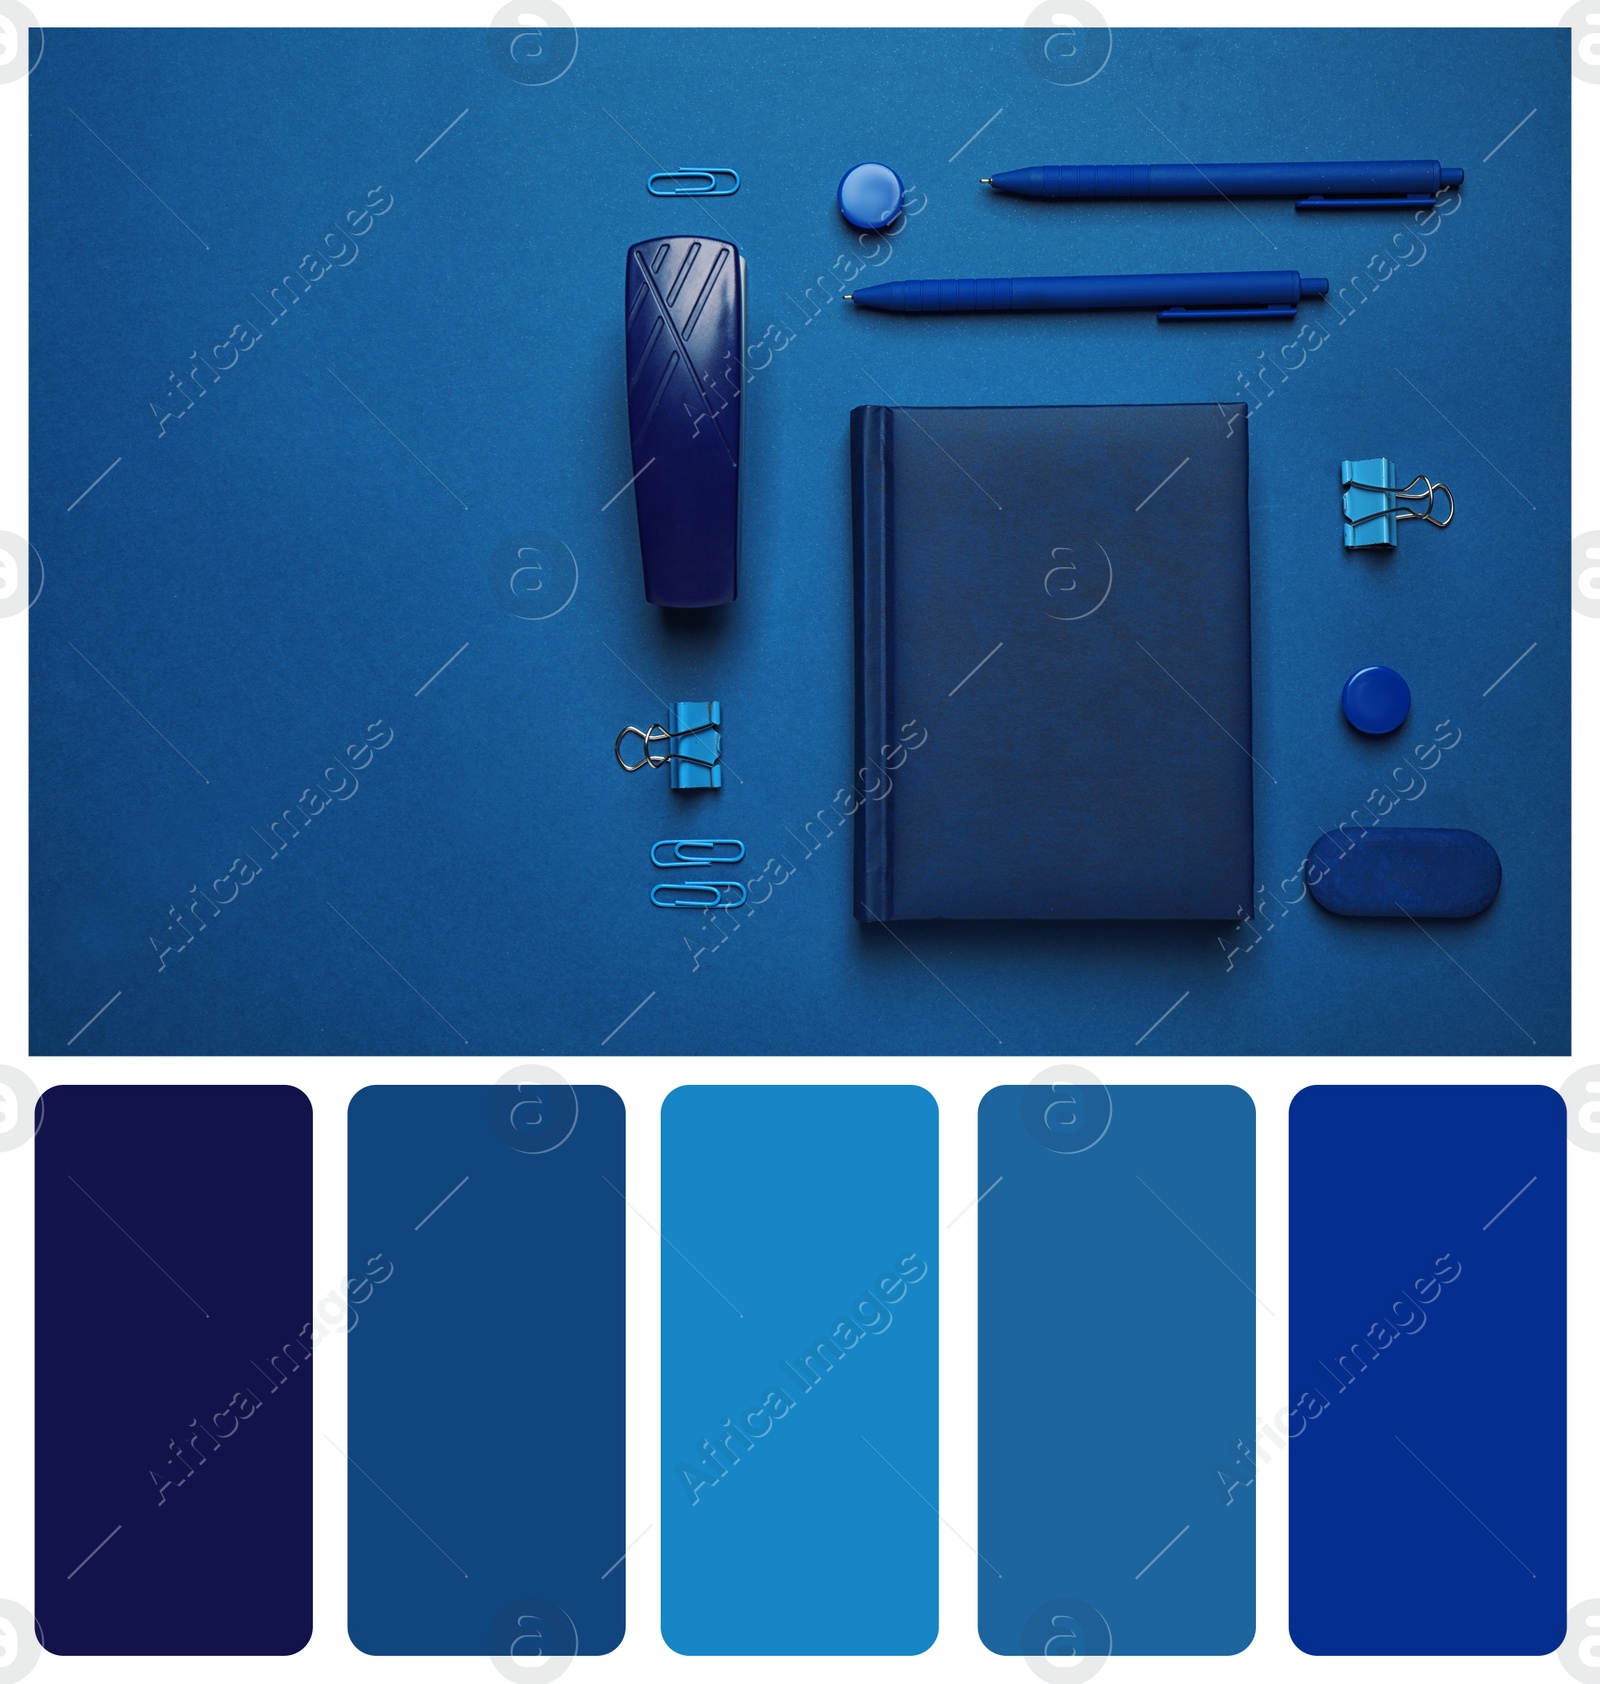 Image of Flat lay composition inspired by color of the year 2020 (Classic blue) on bright background